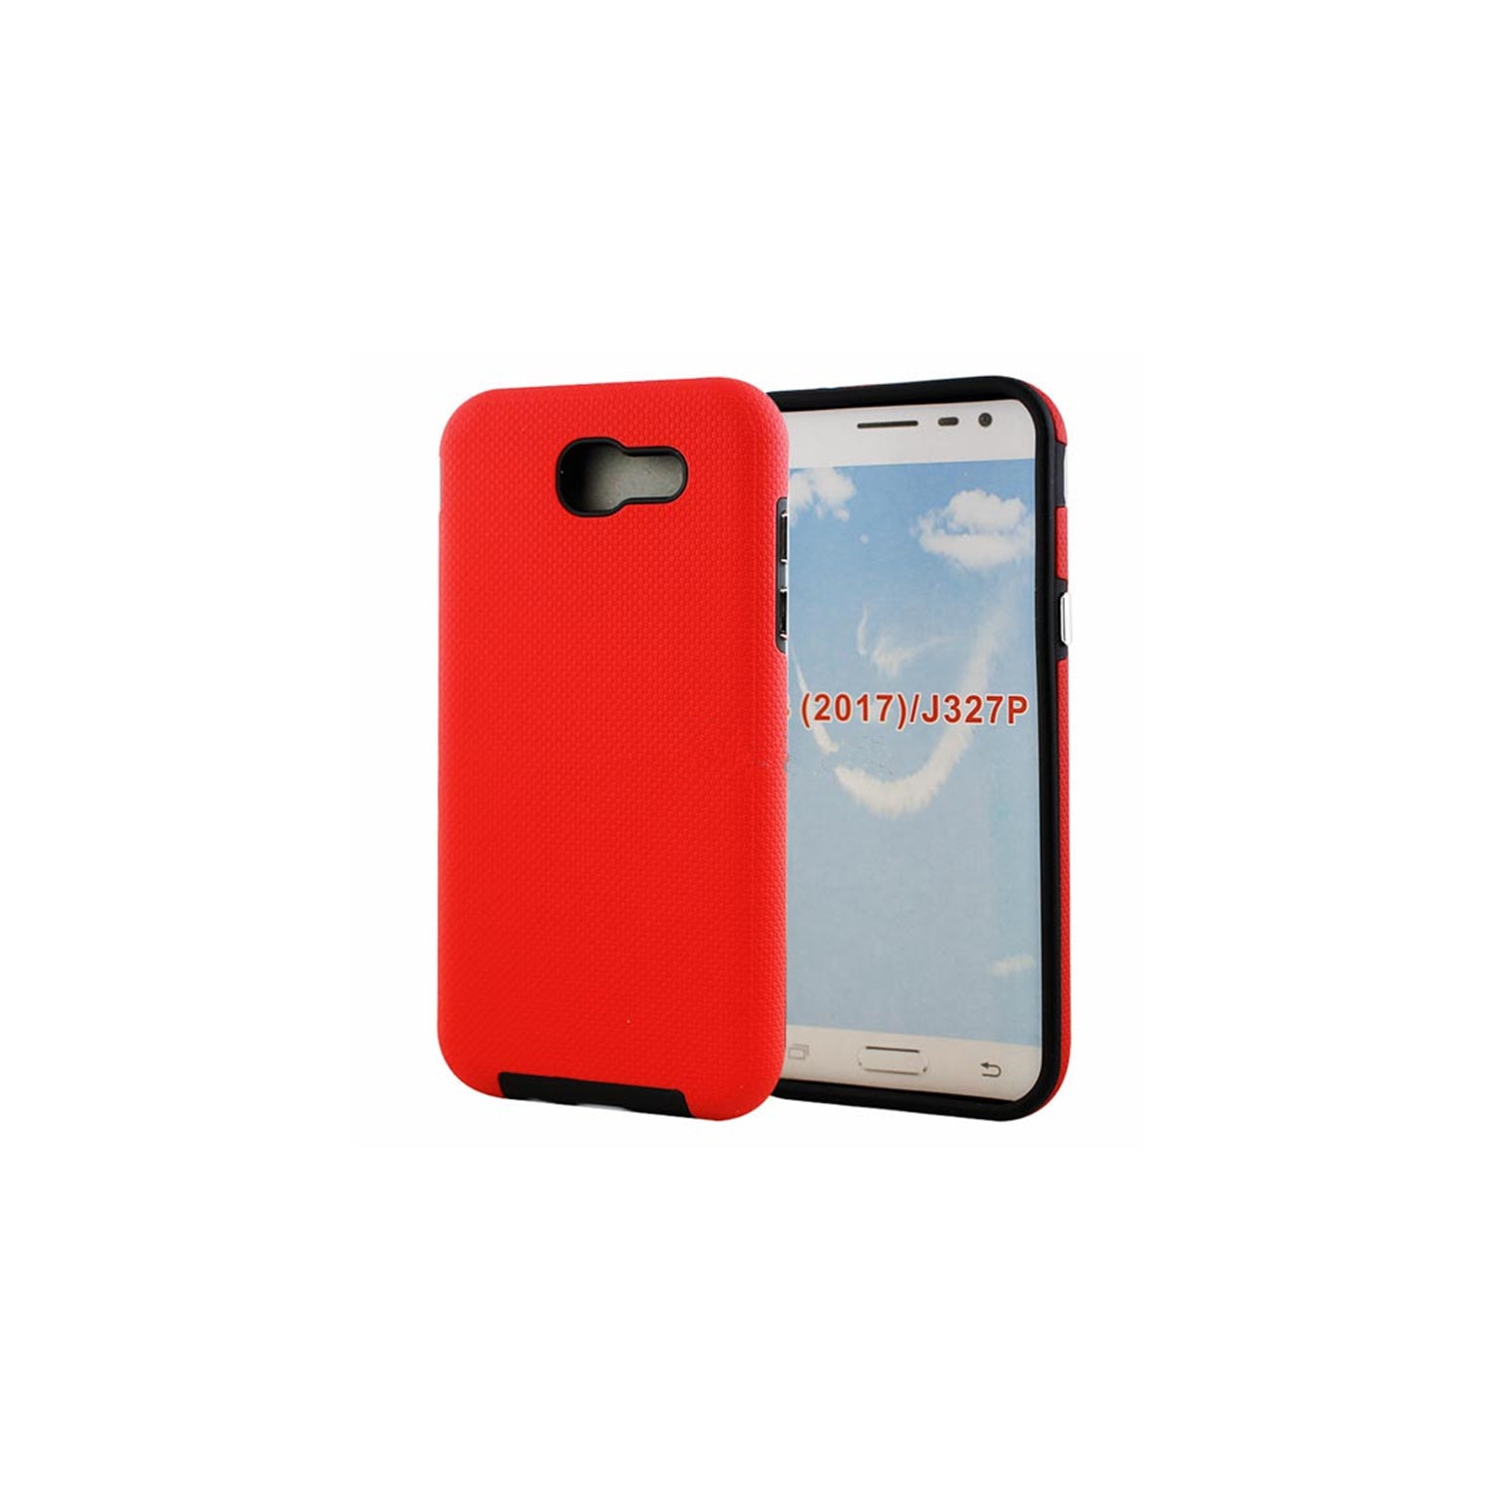 【CSmart】 Slim Fitted Hybrid Hard PC Shell Shockproof Scratch Resistant Case Cover for Samsung Galaxy J3 Prime 2017, Red